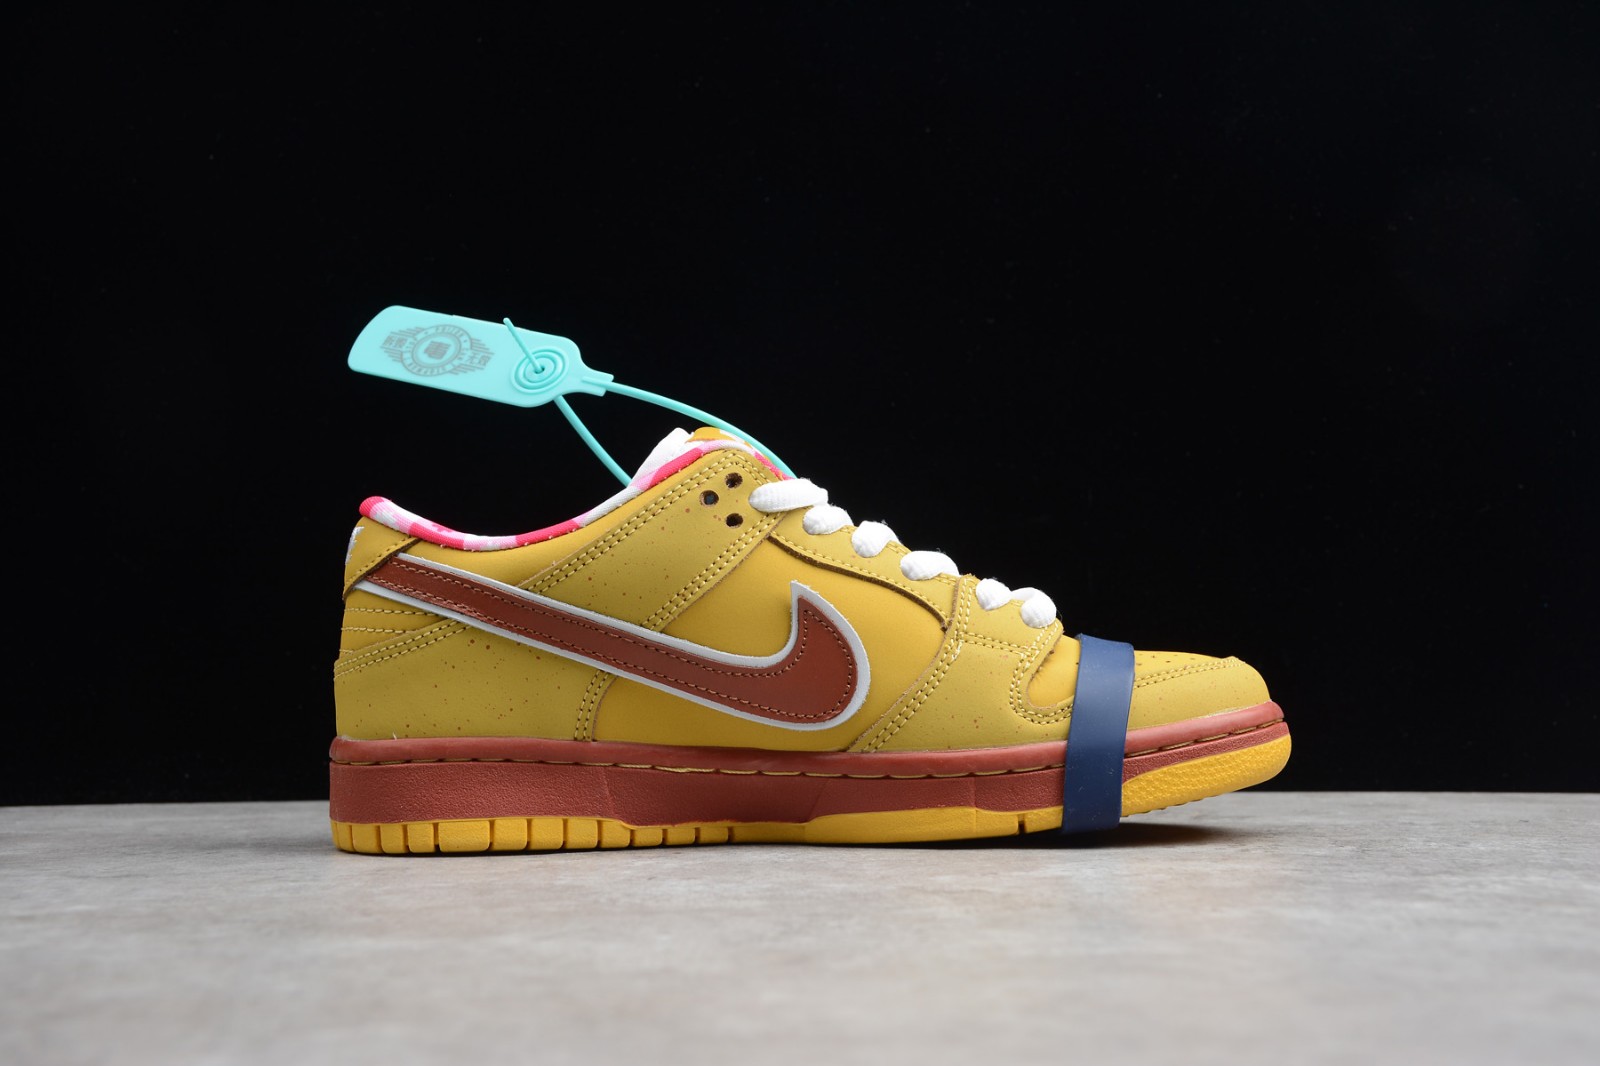 todo lo mejor Mareo Mantenimiento 137 - GmarShops - nike jordans with pink cost on sale today images - Nike  Dunk SB Low Premium Yellow Lobster 313170